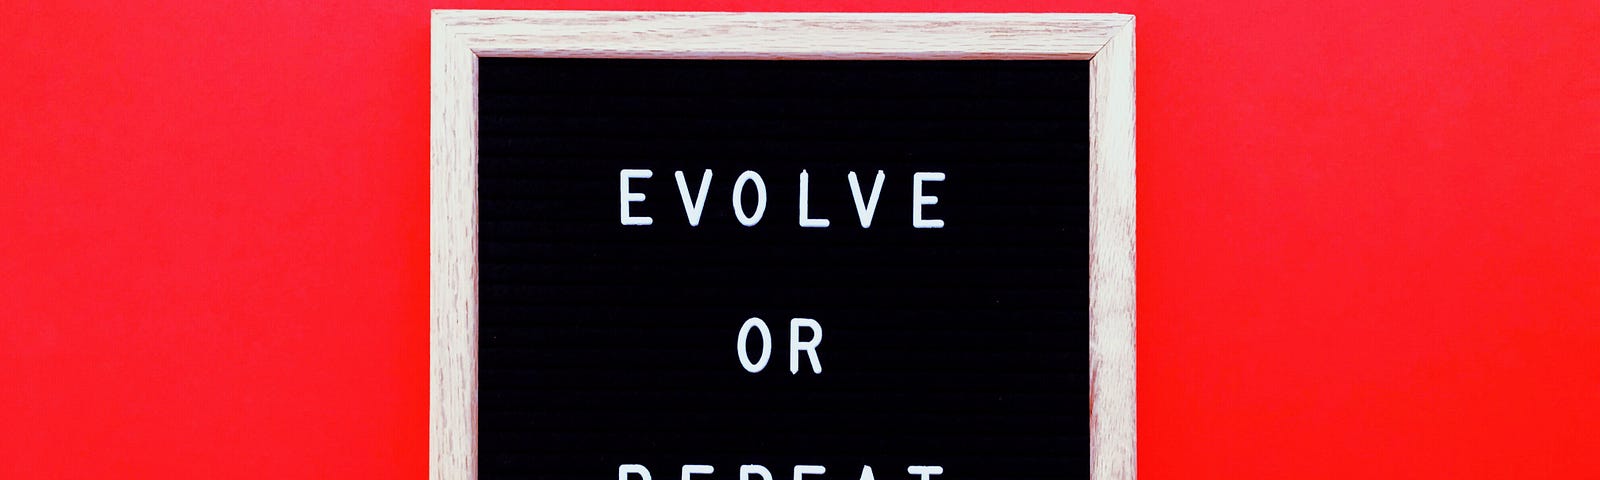 A sign reads “Evolve or repeat” against a red background.